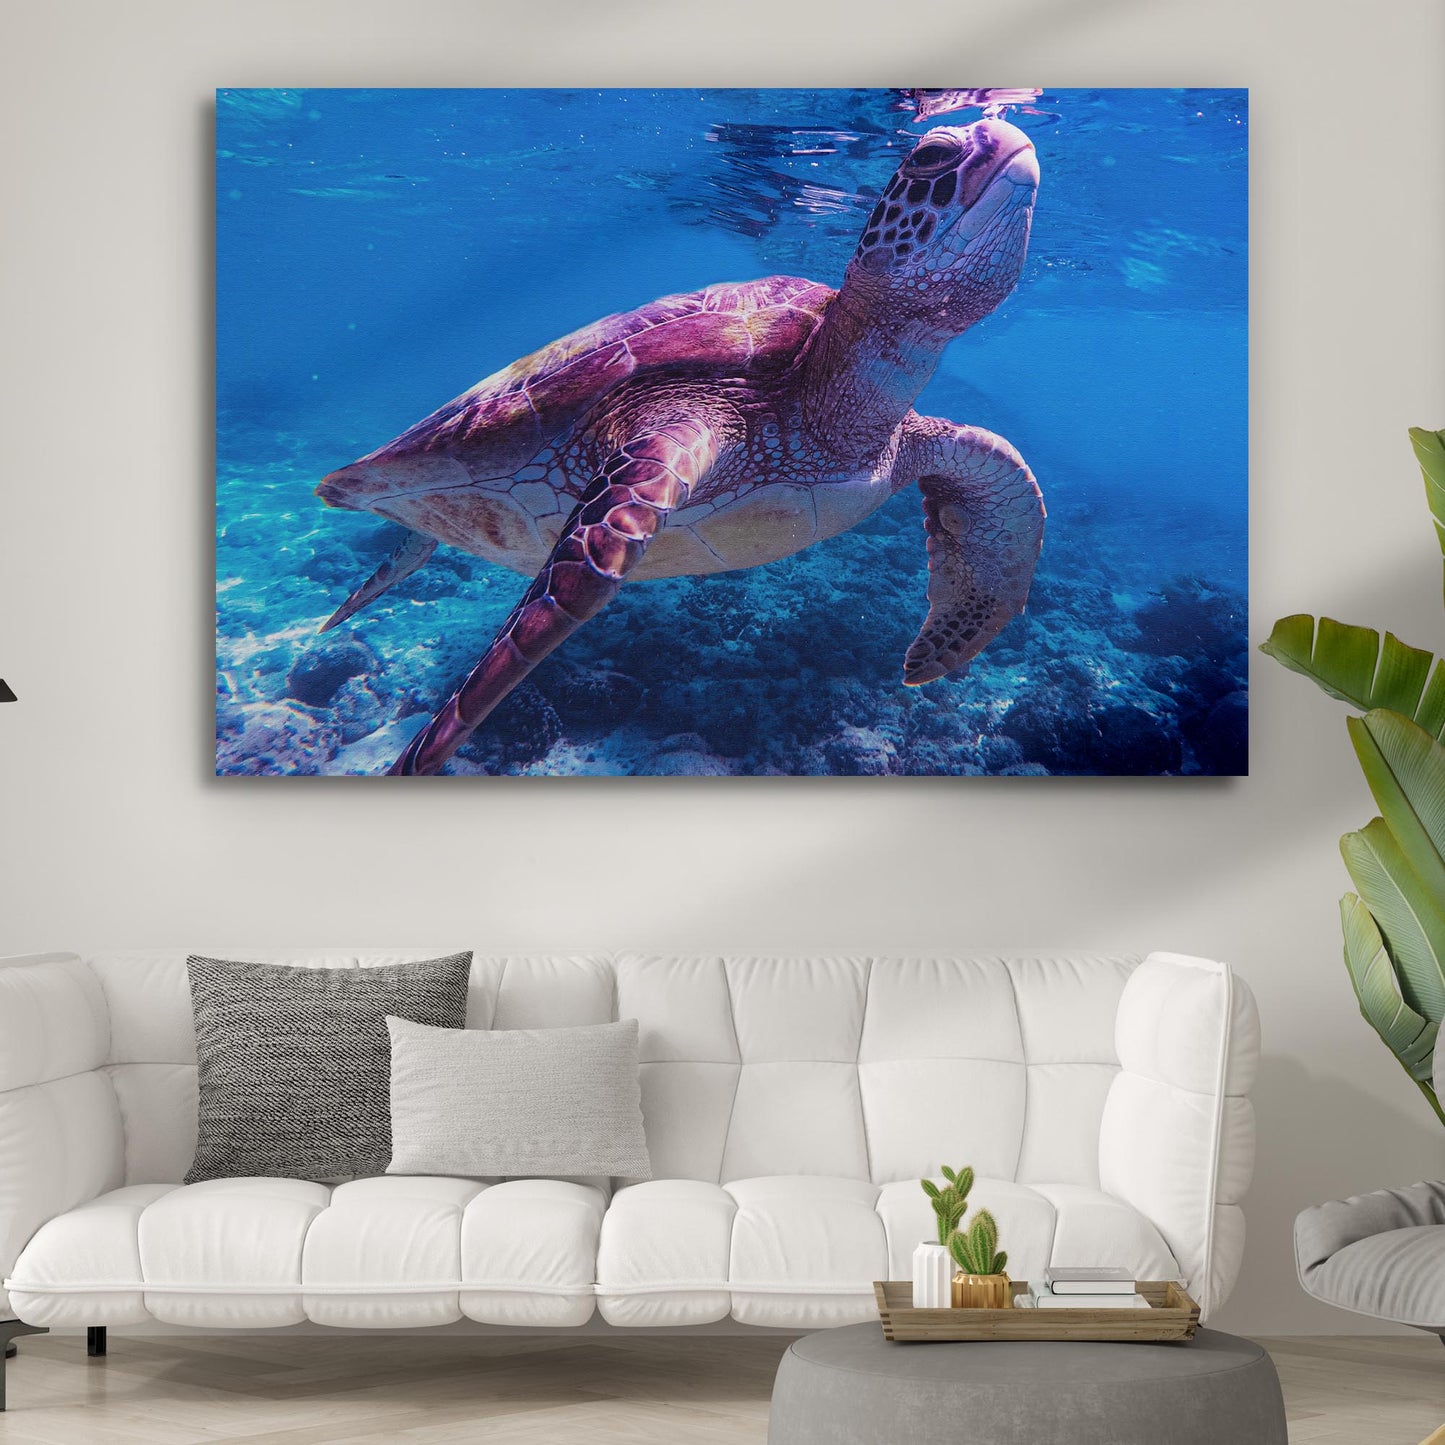 Sea Turtle Swimming Canvas Wall Art - Image by Tailored Canvases